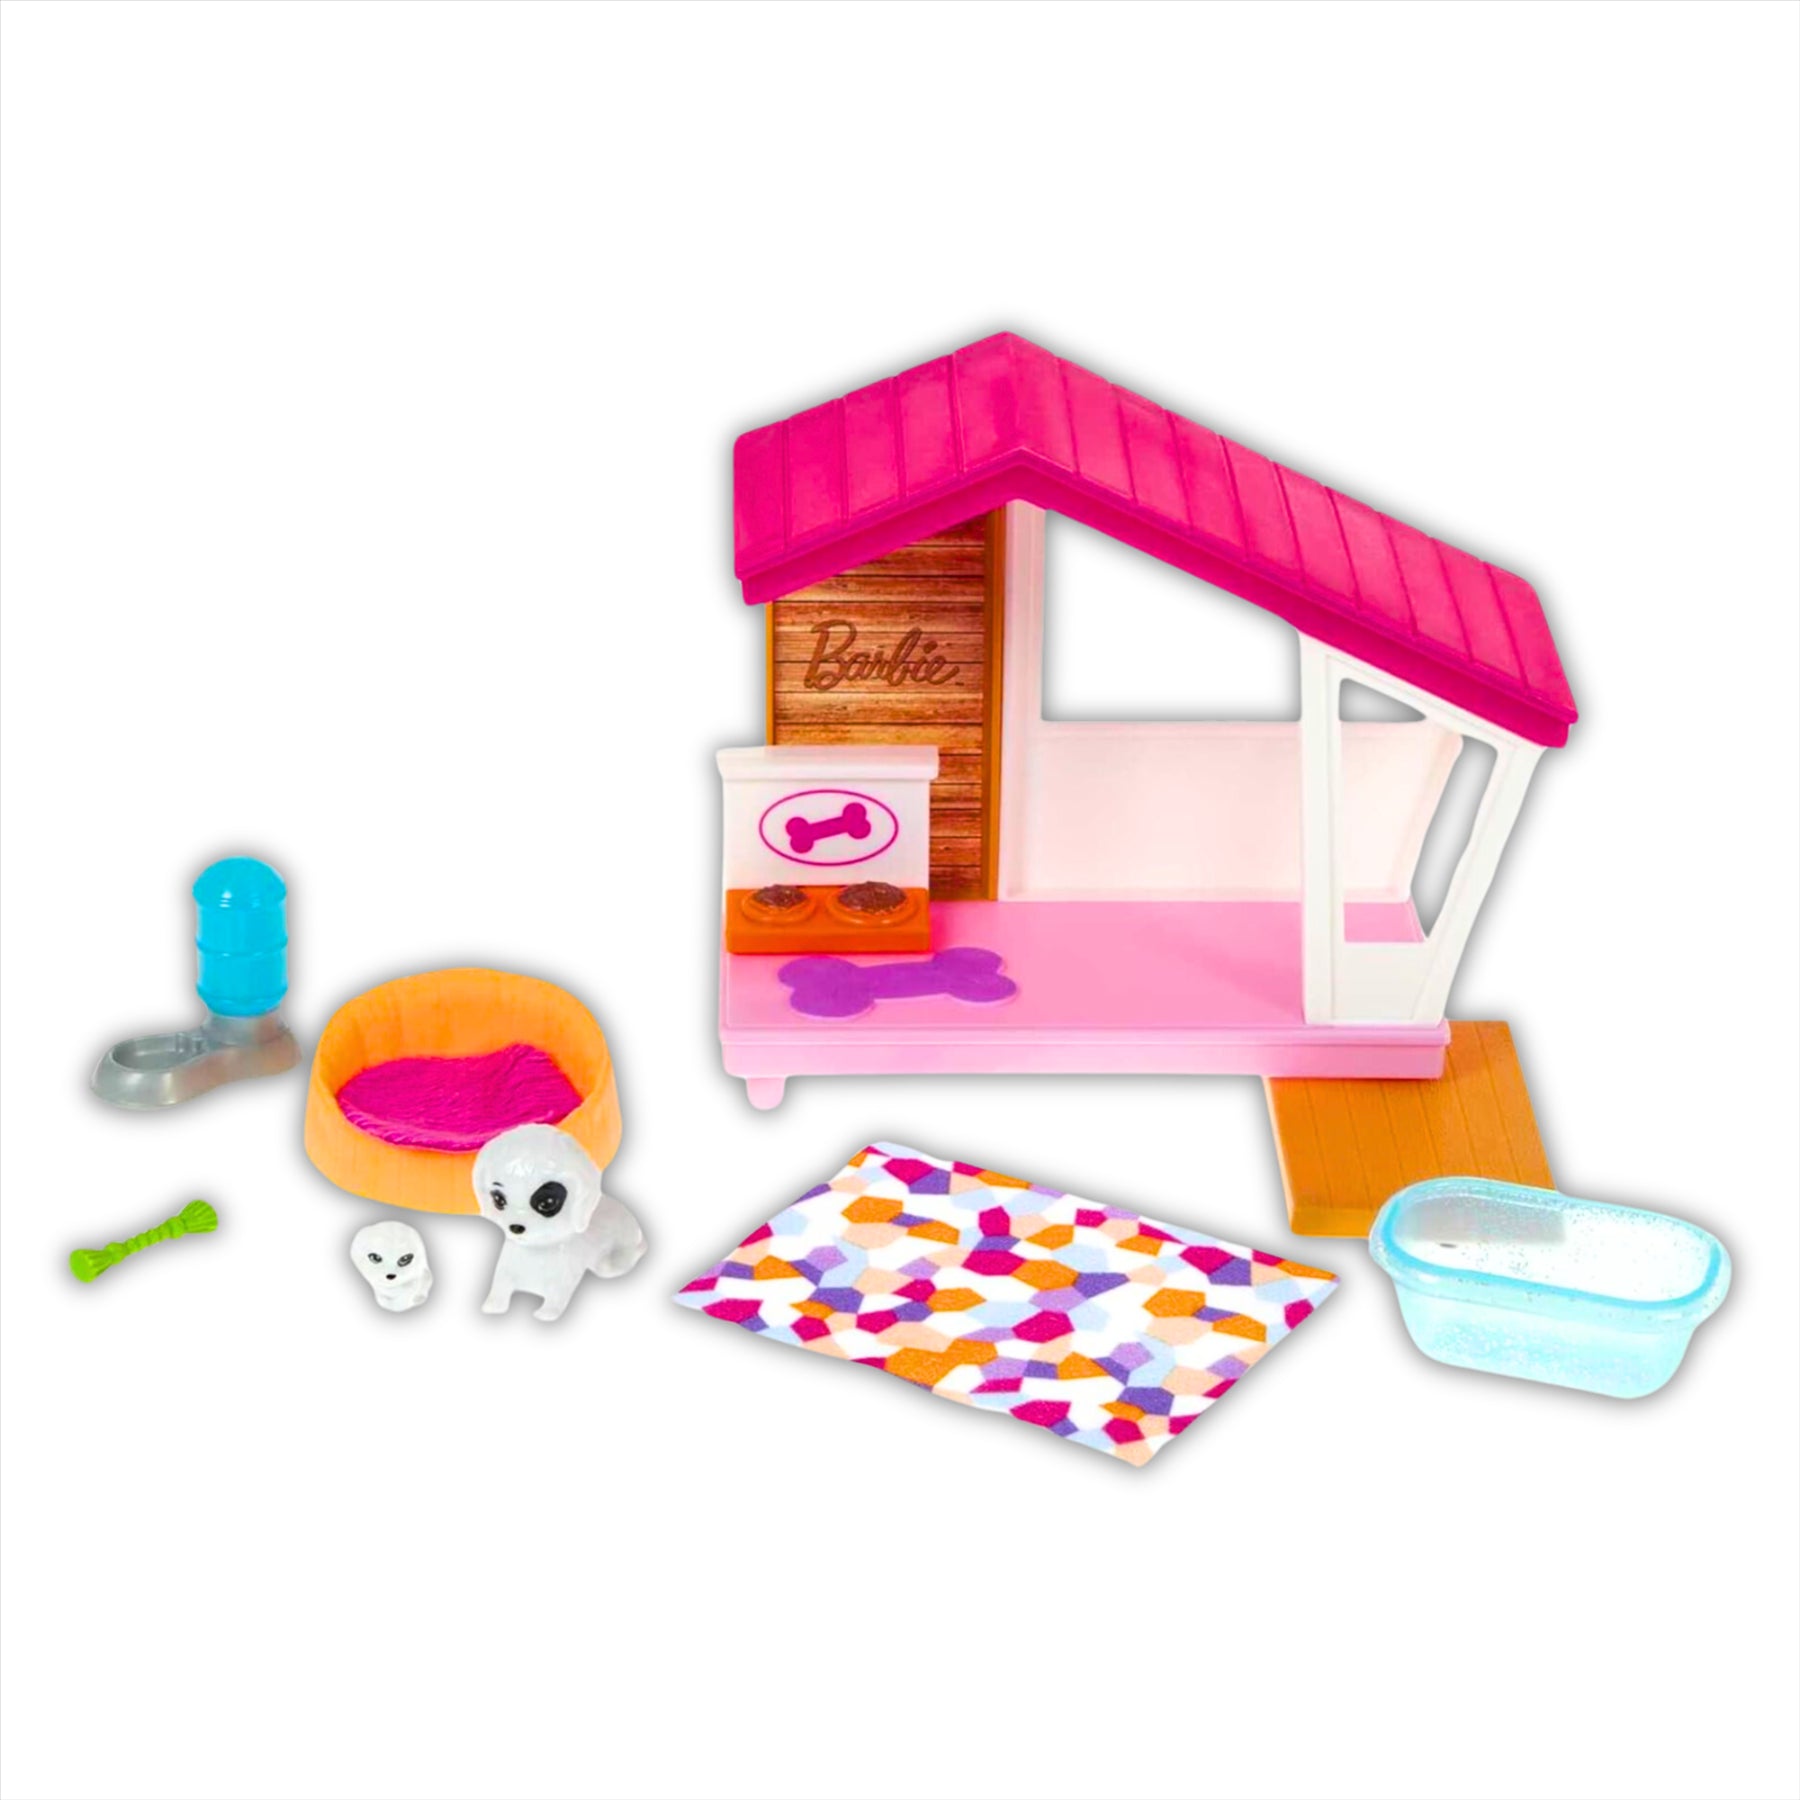 Barbie Dog Kennel Playset with Dogs and Accessories - Includes 2 Dog Figures, Kennel, Bed, Blanket, Bath, Water Bowl, and Chew Toy - Toptoys2u